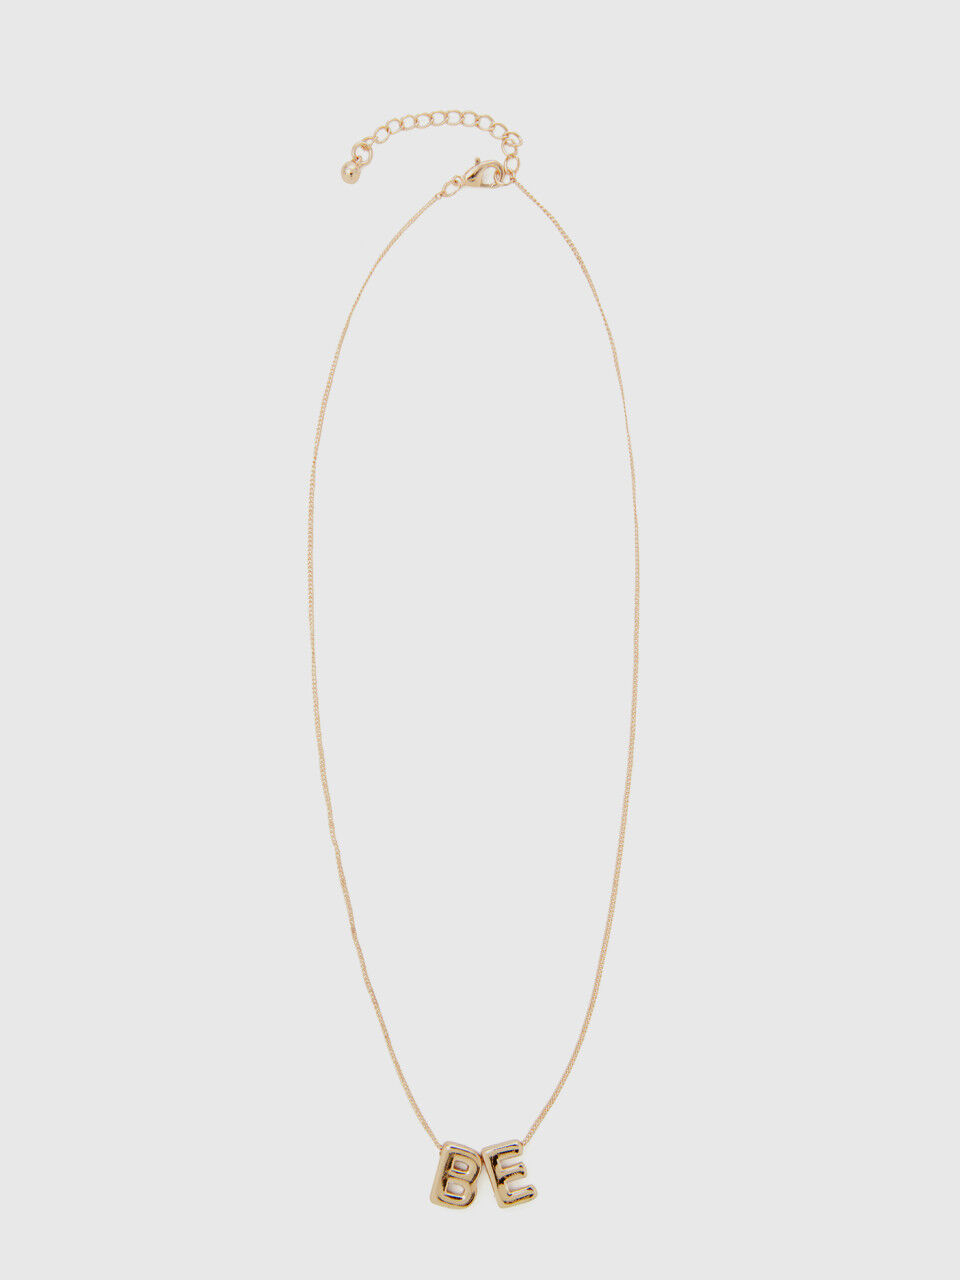 Gold BE necklace